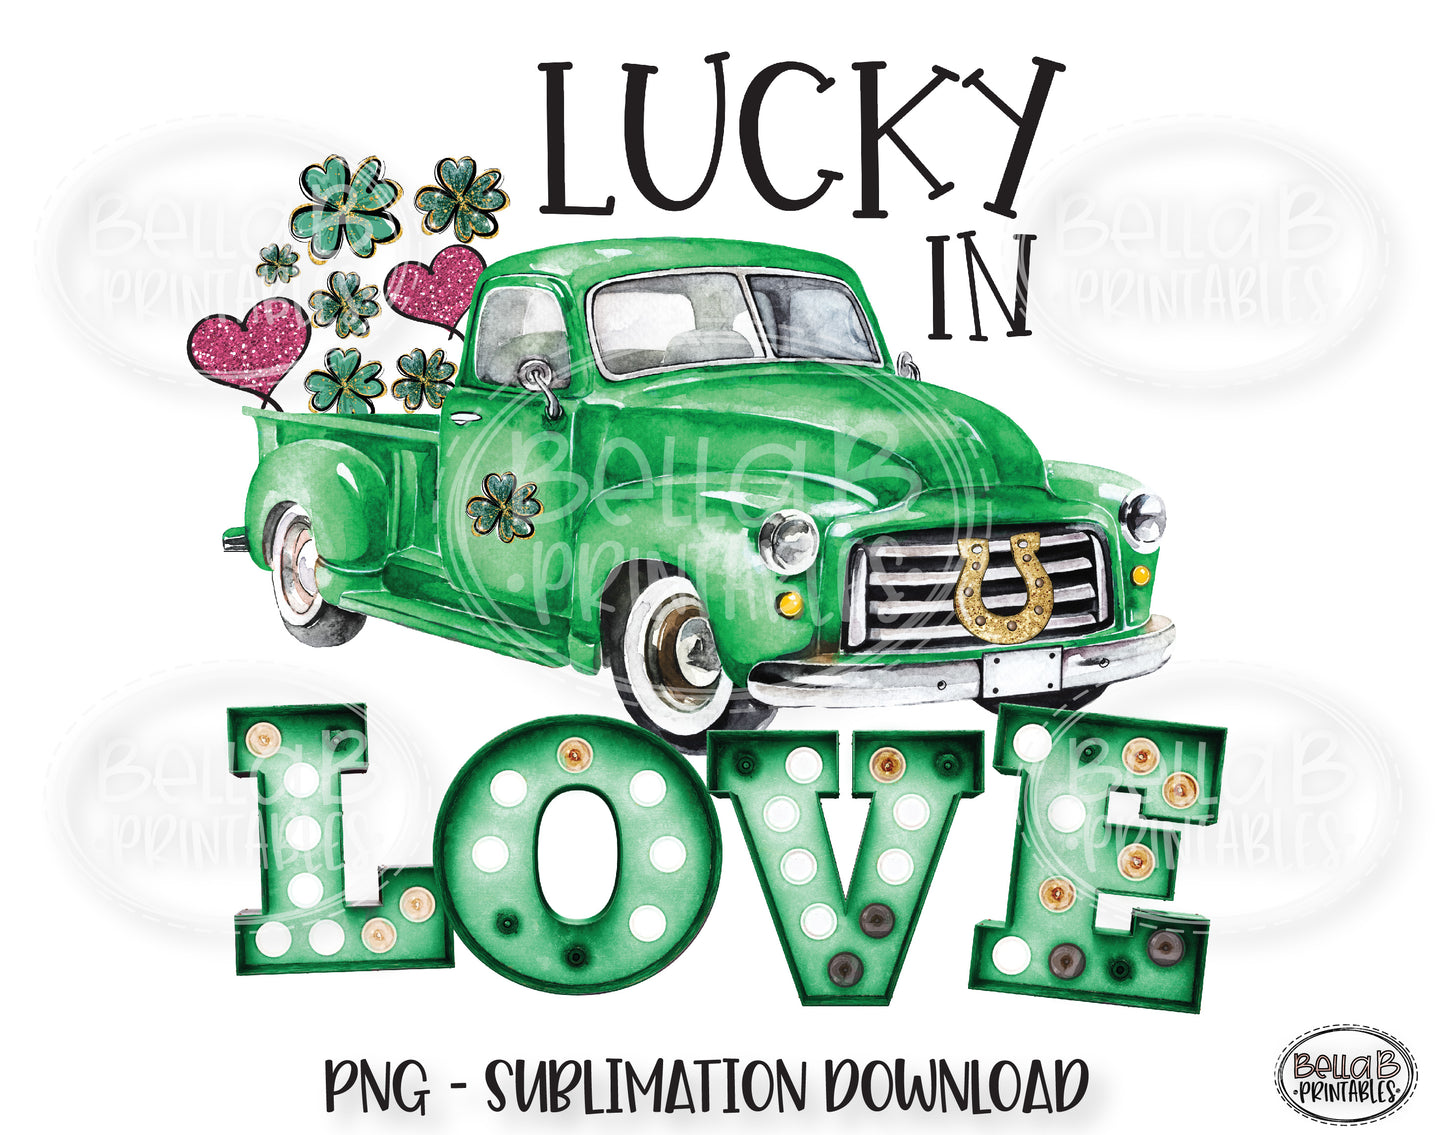 St Patricks Day Sublimation Design, Lucky In Love Vintage Truck Sublimation